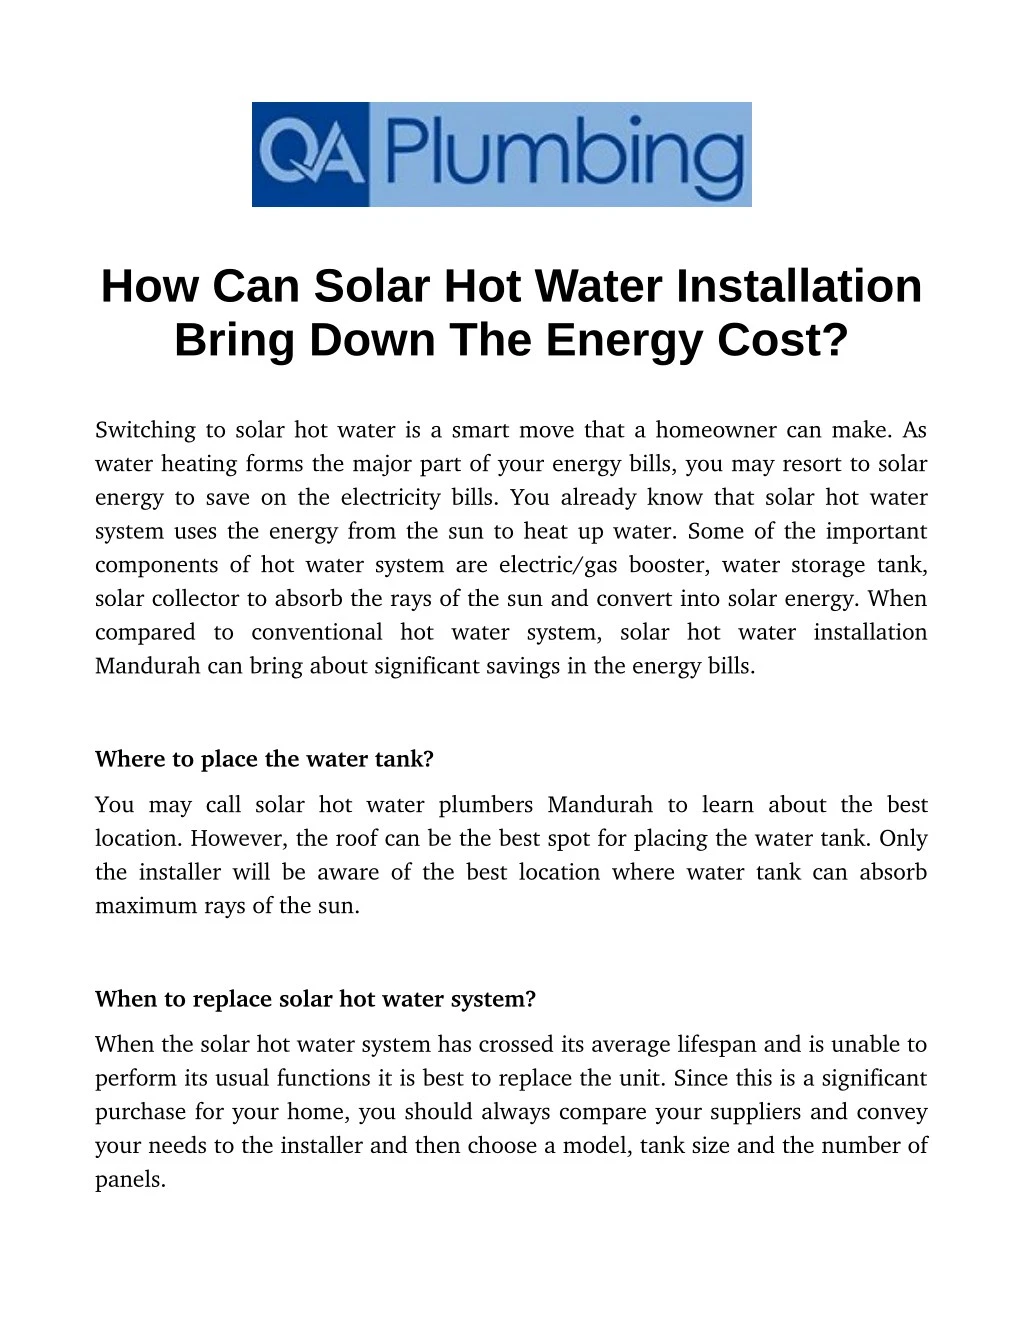 how can solar hot water installation bring down